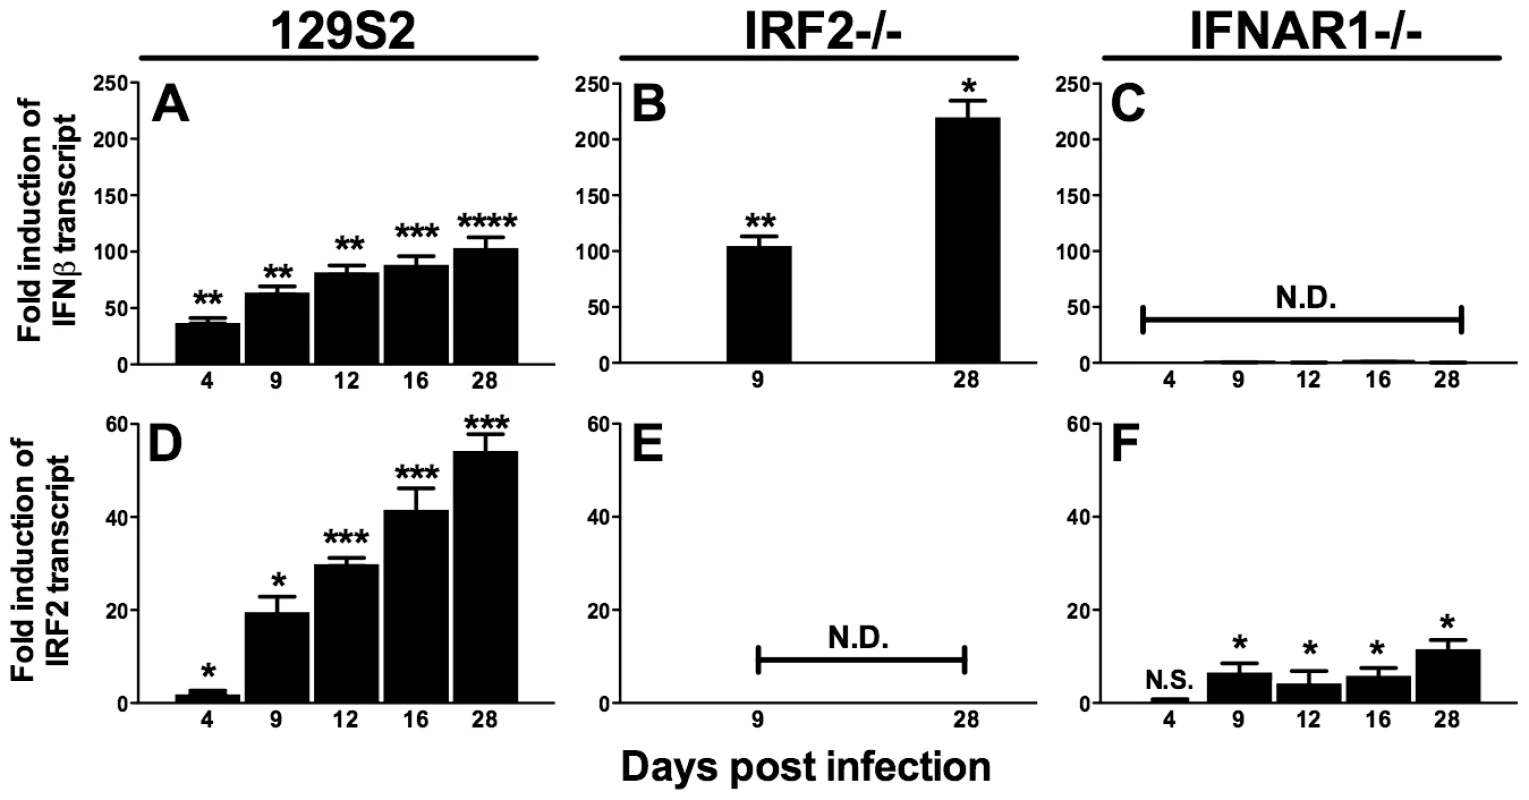 IFNβ and IRF2 are upregulated during acute infection and latency <i>in vivo</i>.